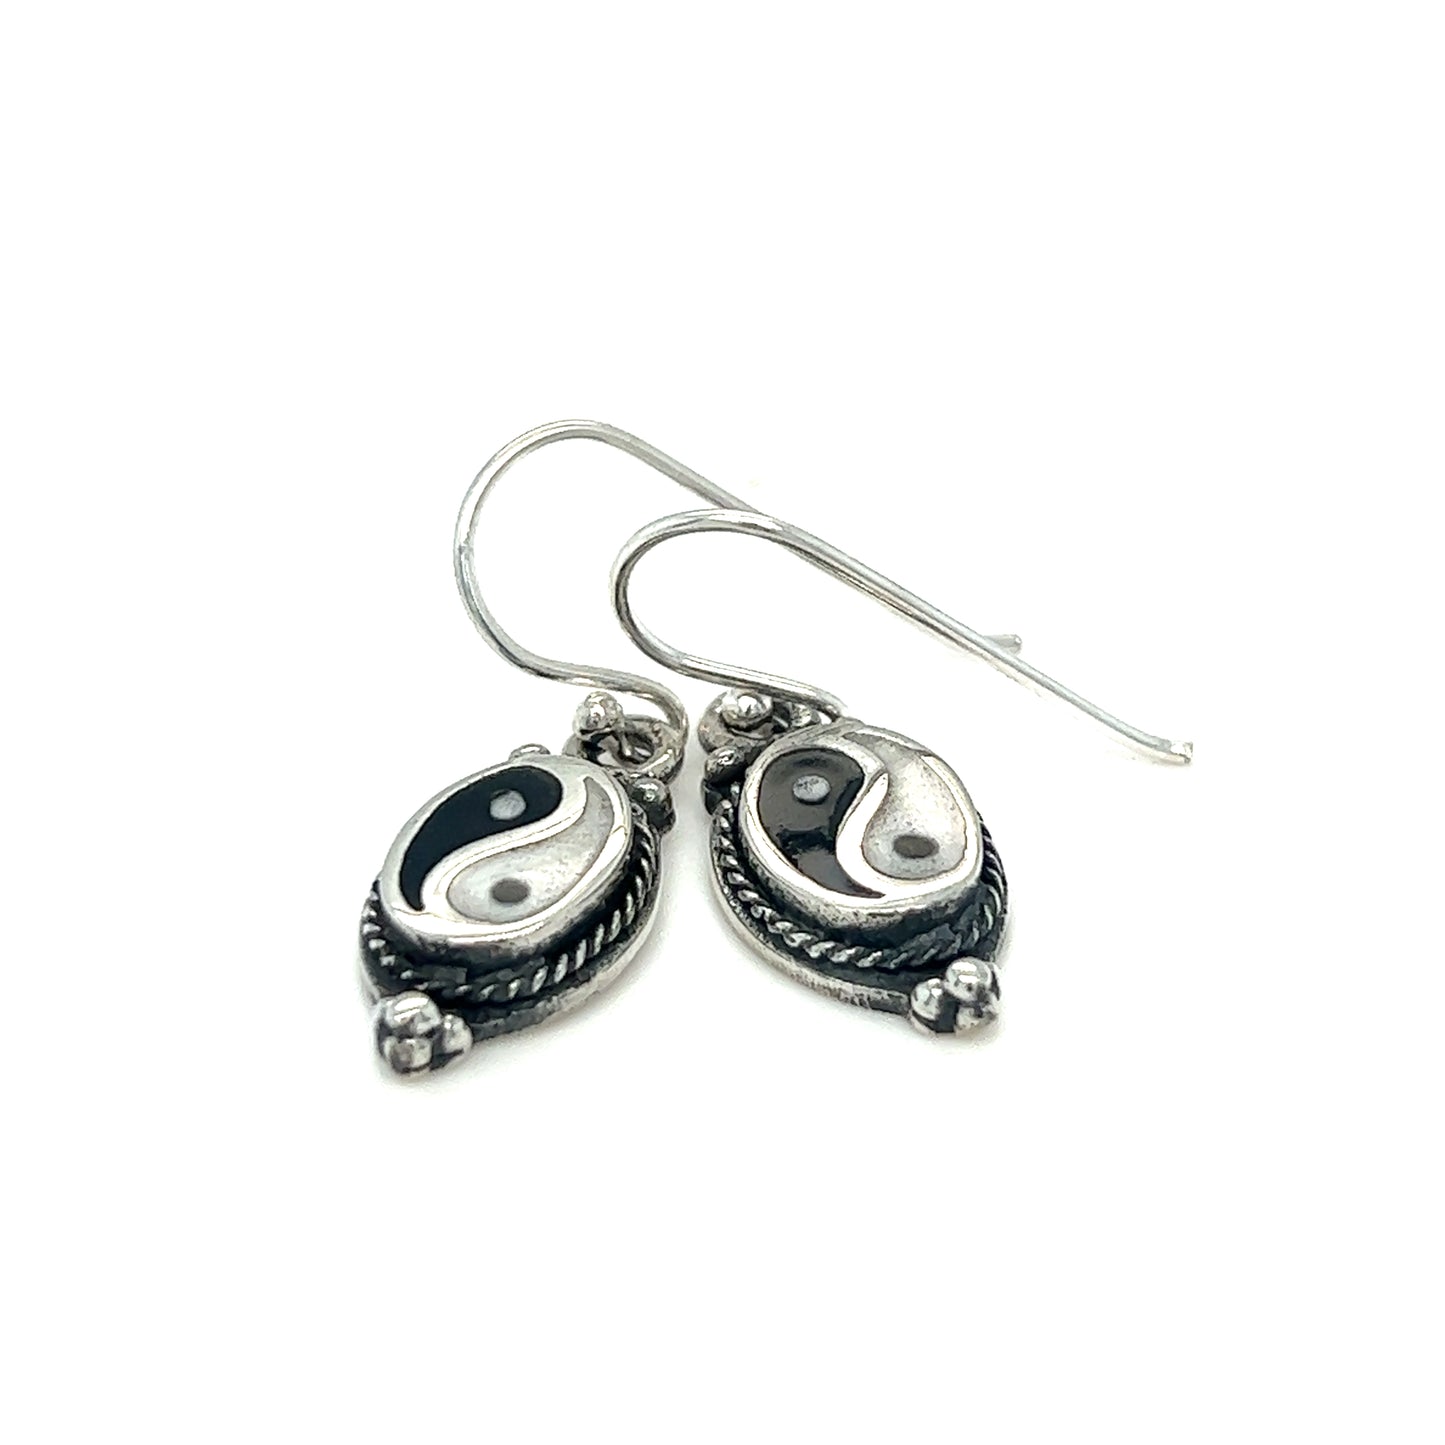 These Yin-Yang Earrings with Rope Border are a perfect representation of balance in a stunning silver design.